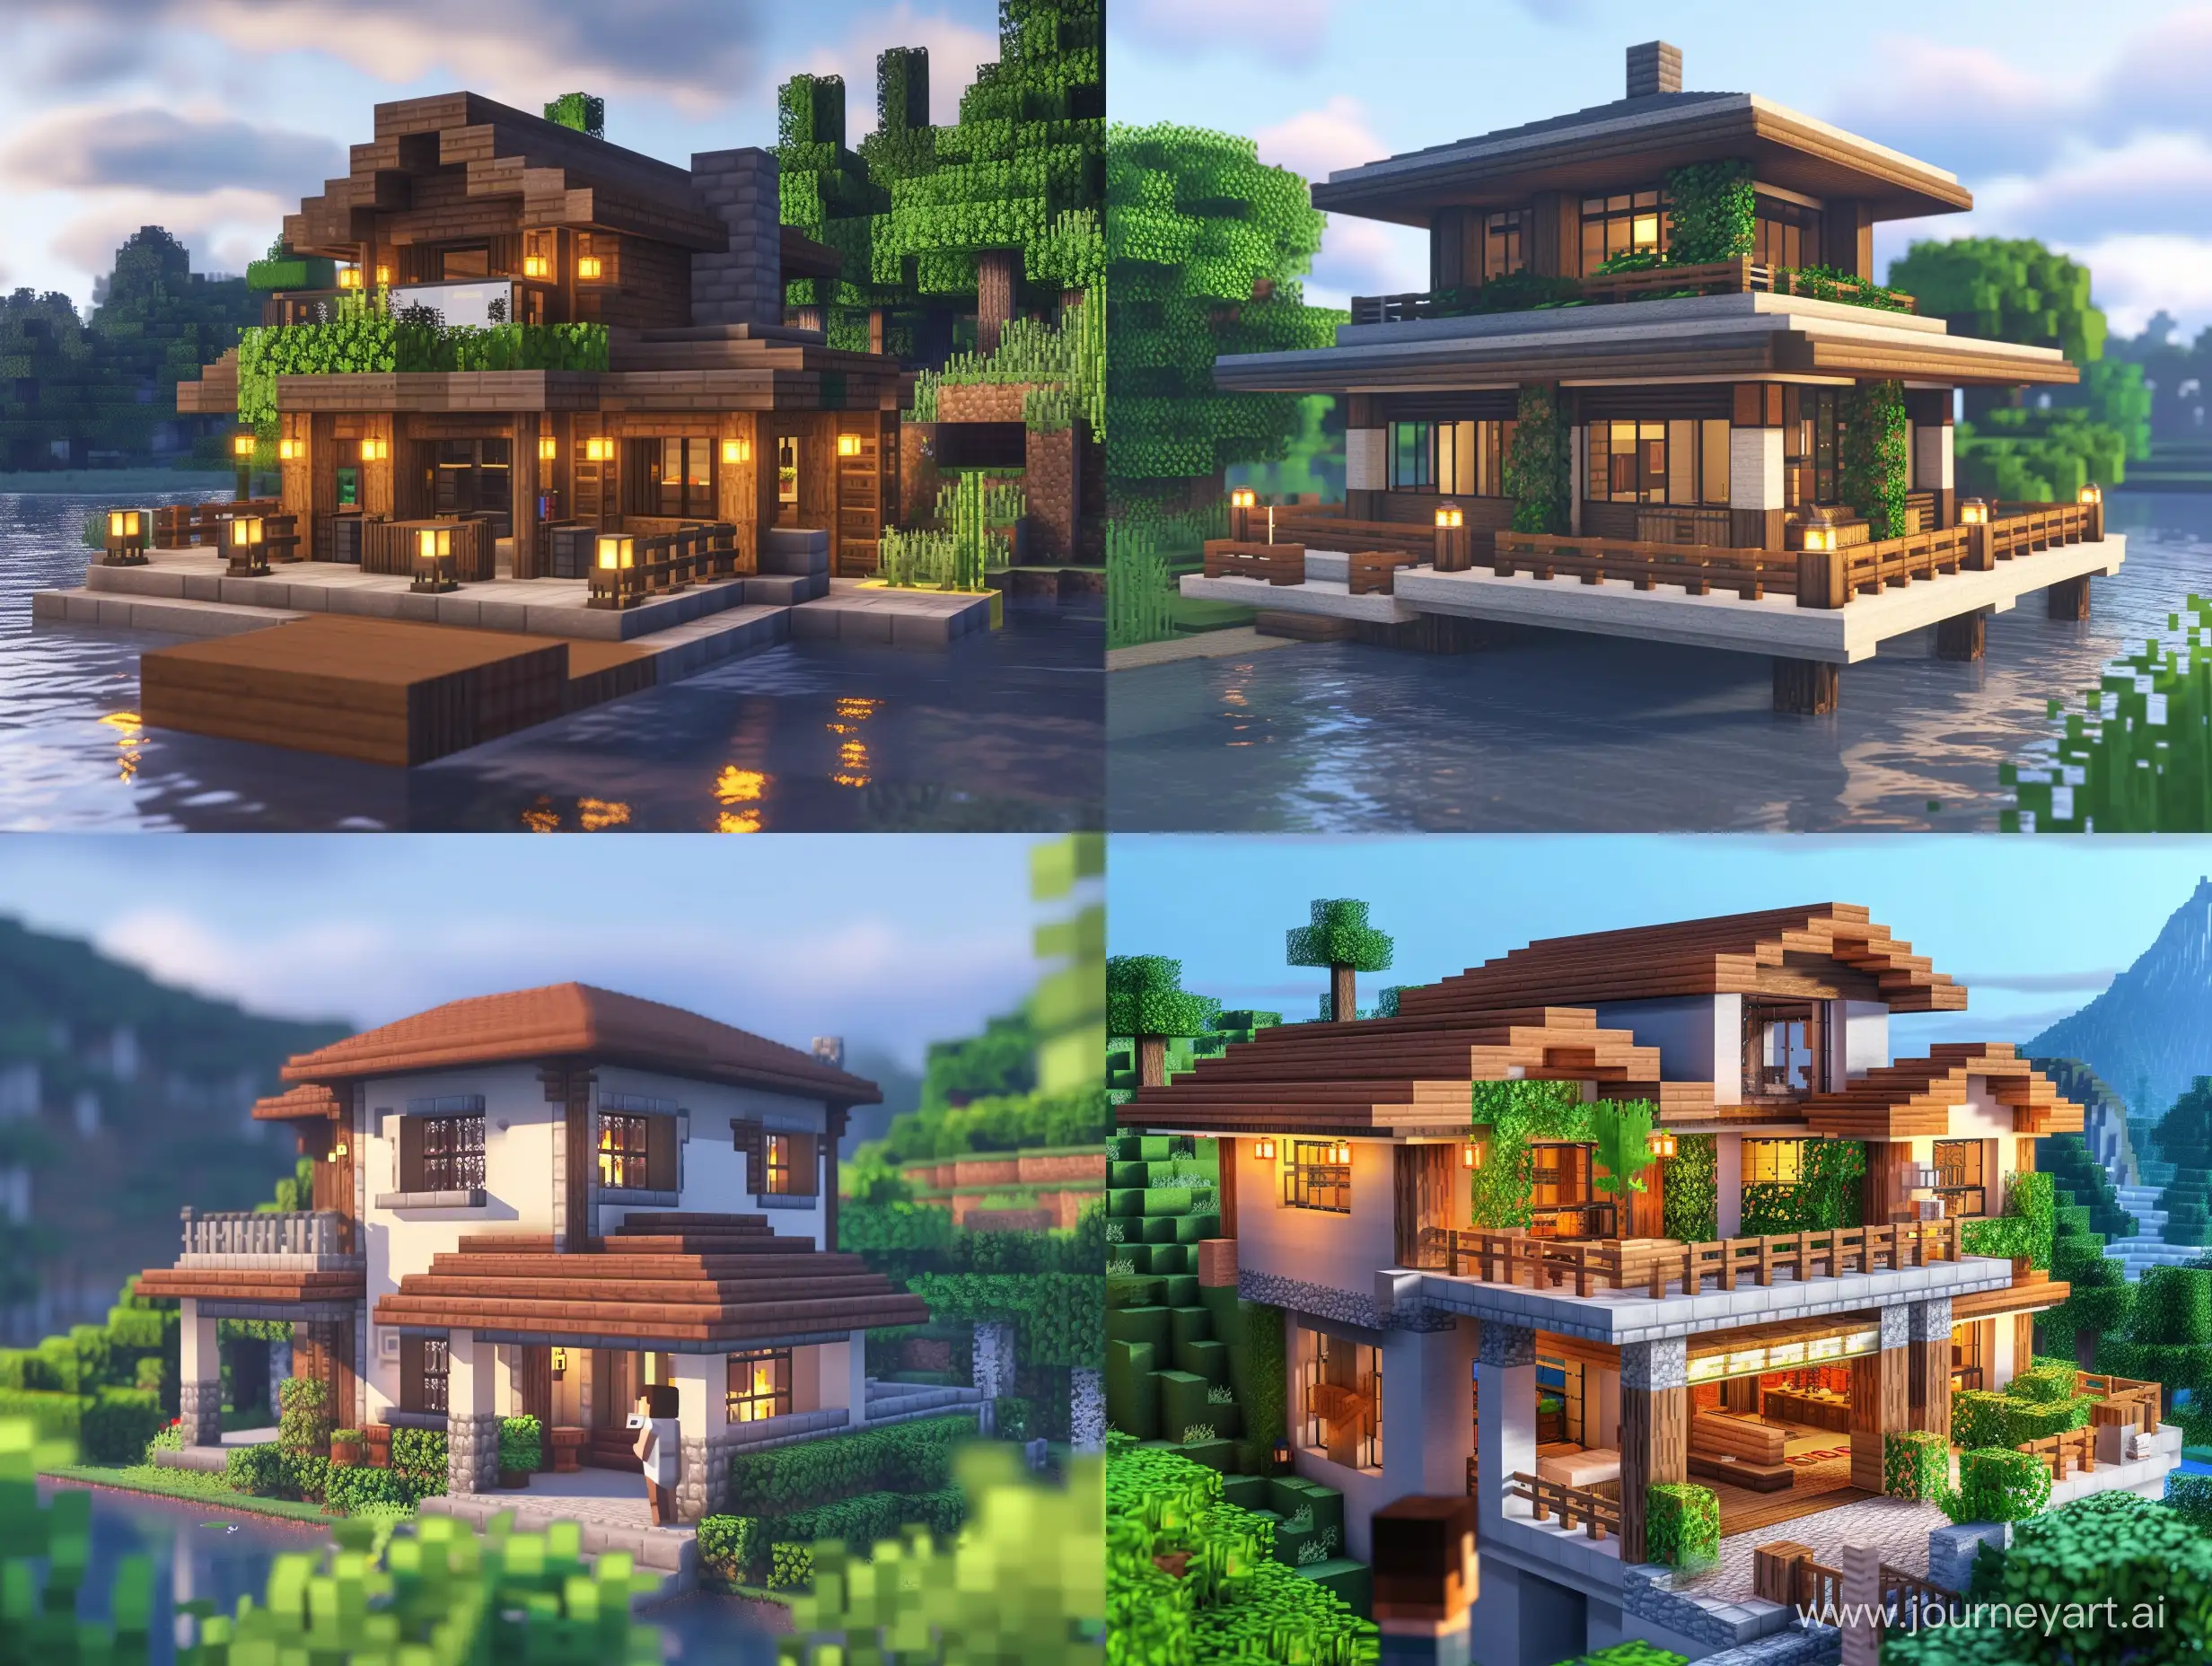 a peaceful 2 story house in minecraft gameplay, full view, day time, natural lighting, environment, architecture, nature, third person view, a man looking at a house,
